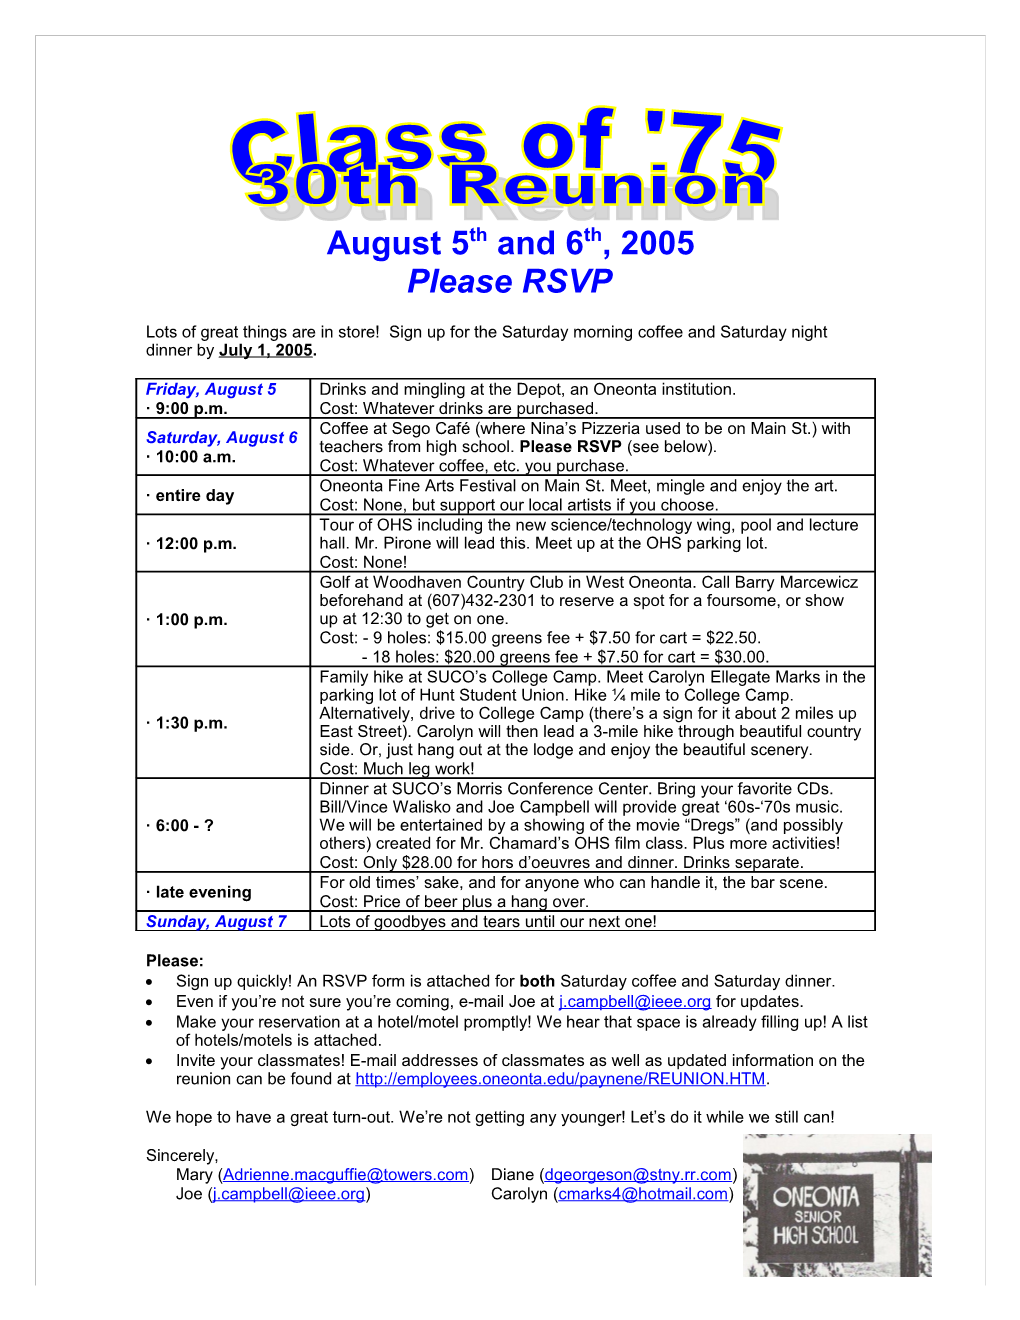 Please Rsvp to Our 30Th Ohs Class of 75 Reunion to Be Held August 5Th and 6Th